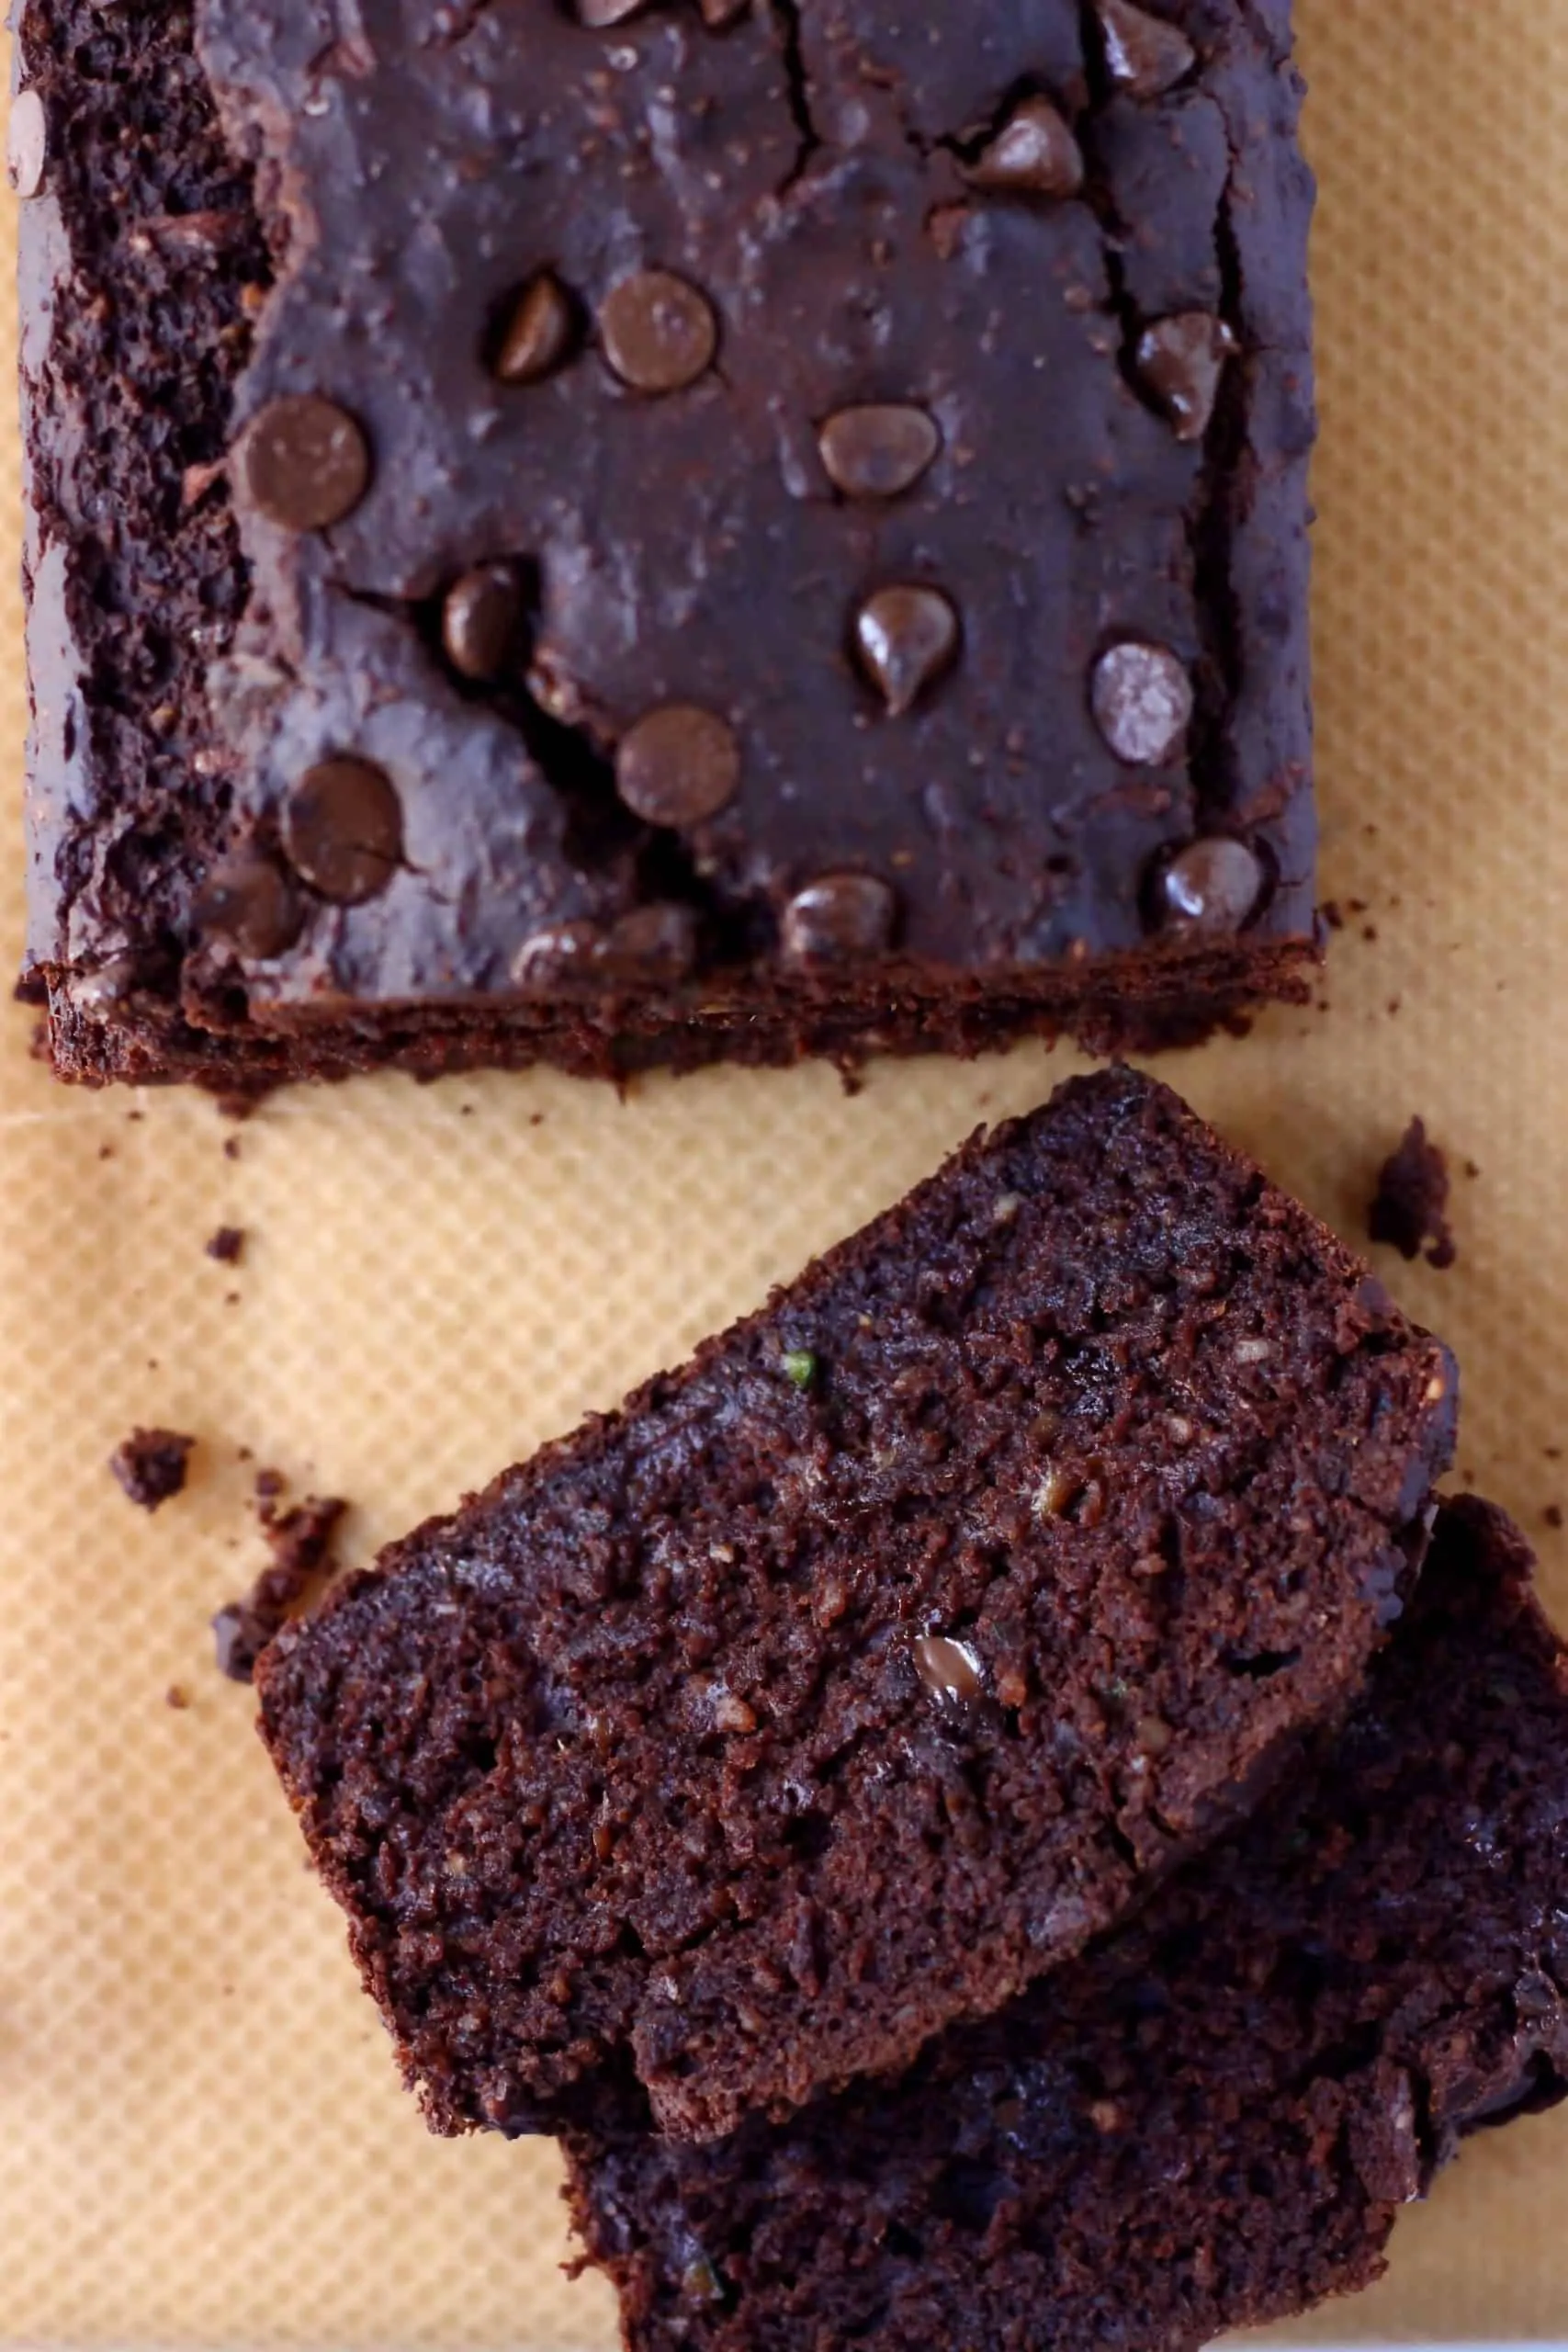 A loaf of chocolate zucchini bread studded with chocolate chips with two slices taken from it against a sheet of brown baking paper